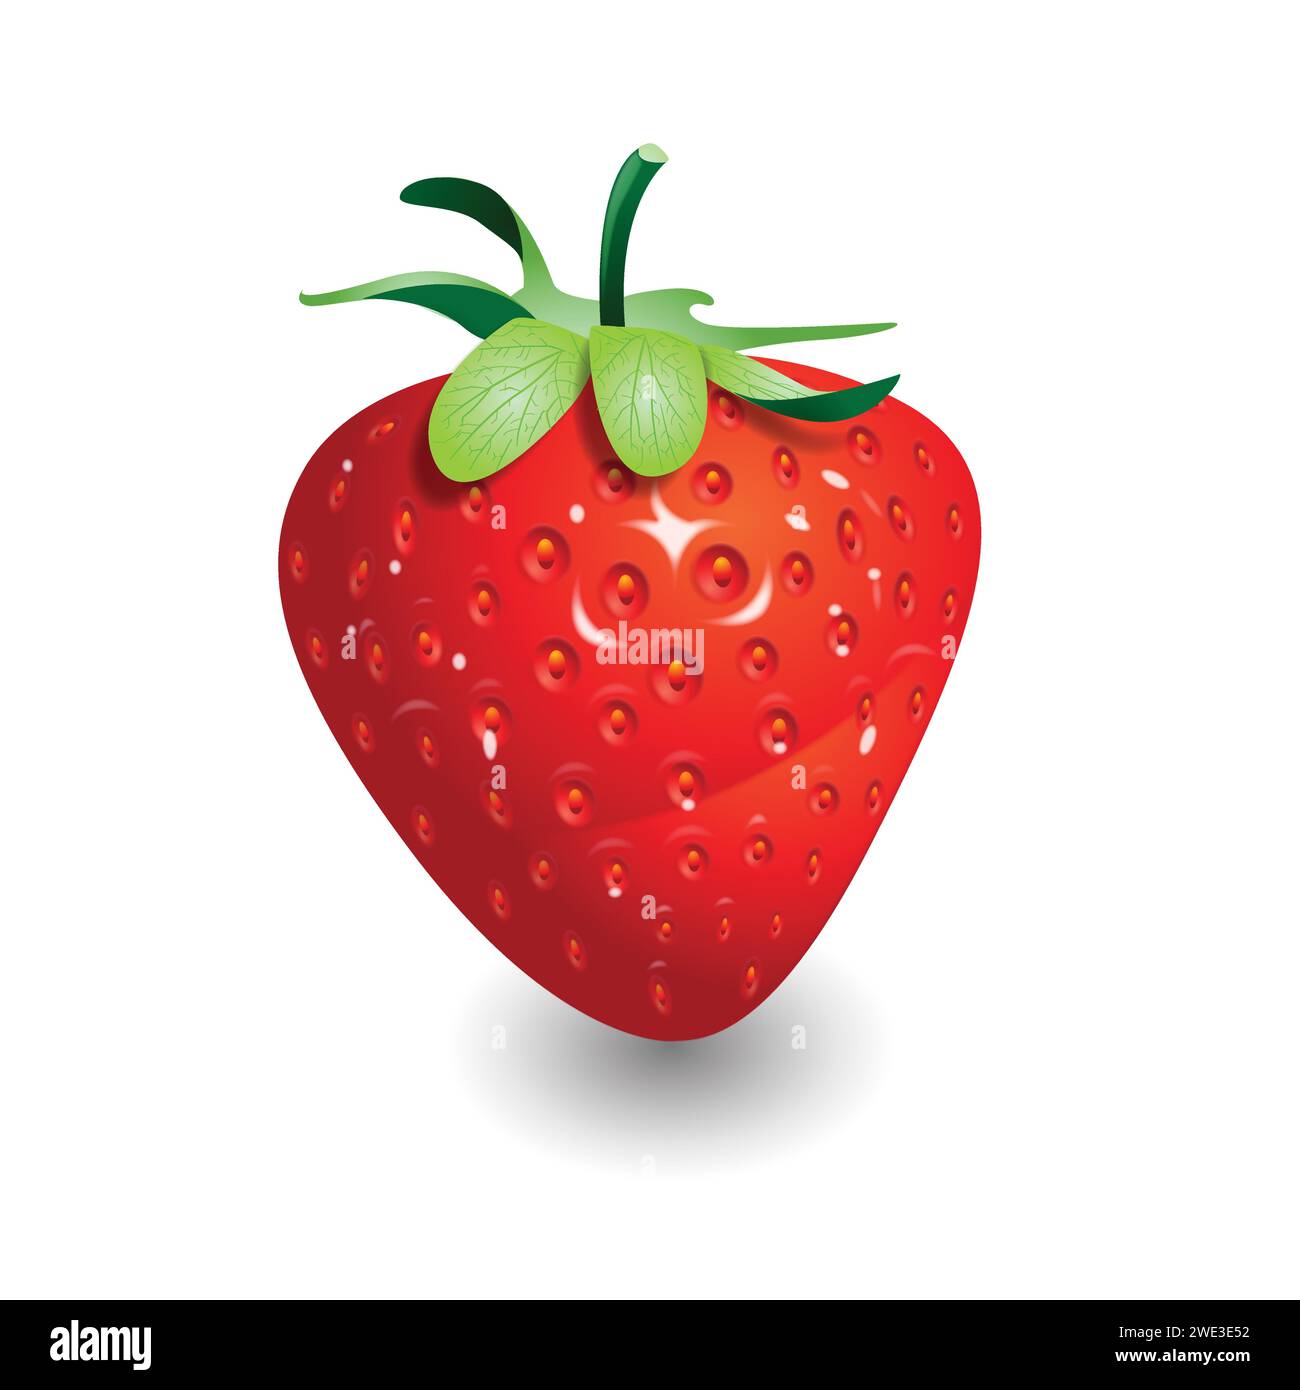 Strawberry. delicious strawberries. sweet strawberry strawberry illustration Stock Vector